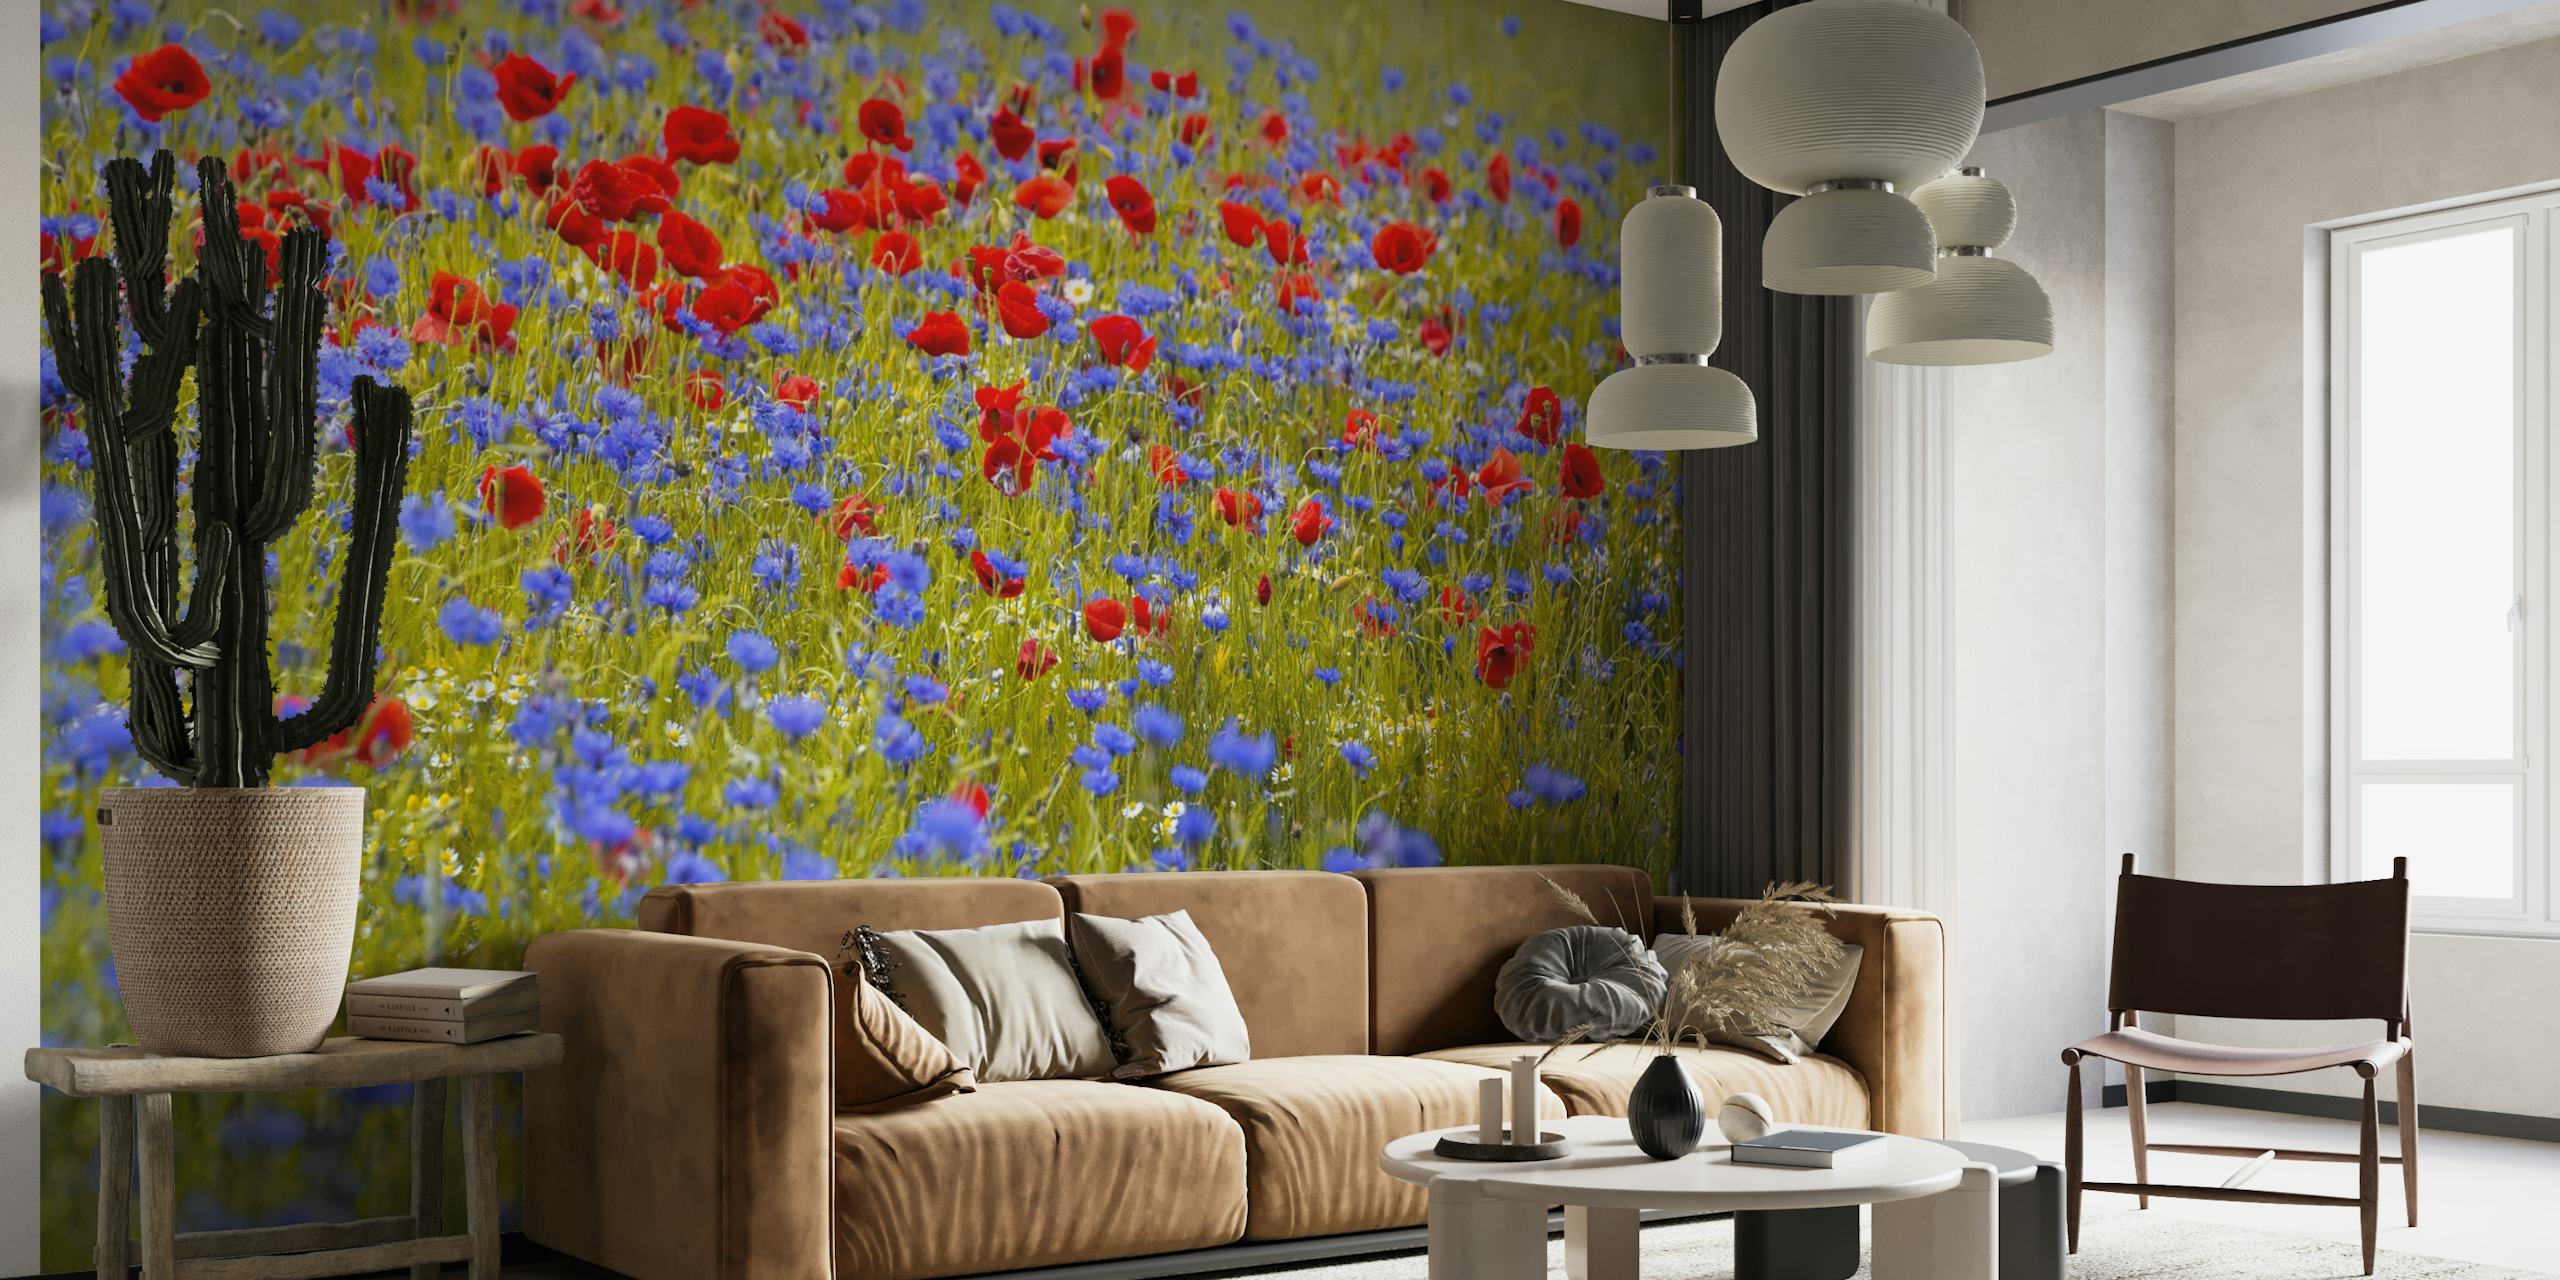 Blue Red Bloom Field wall mural with red poppies and blue cornflowers